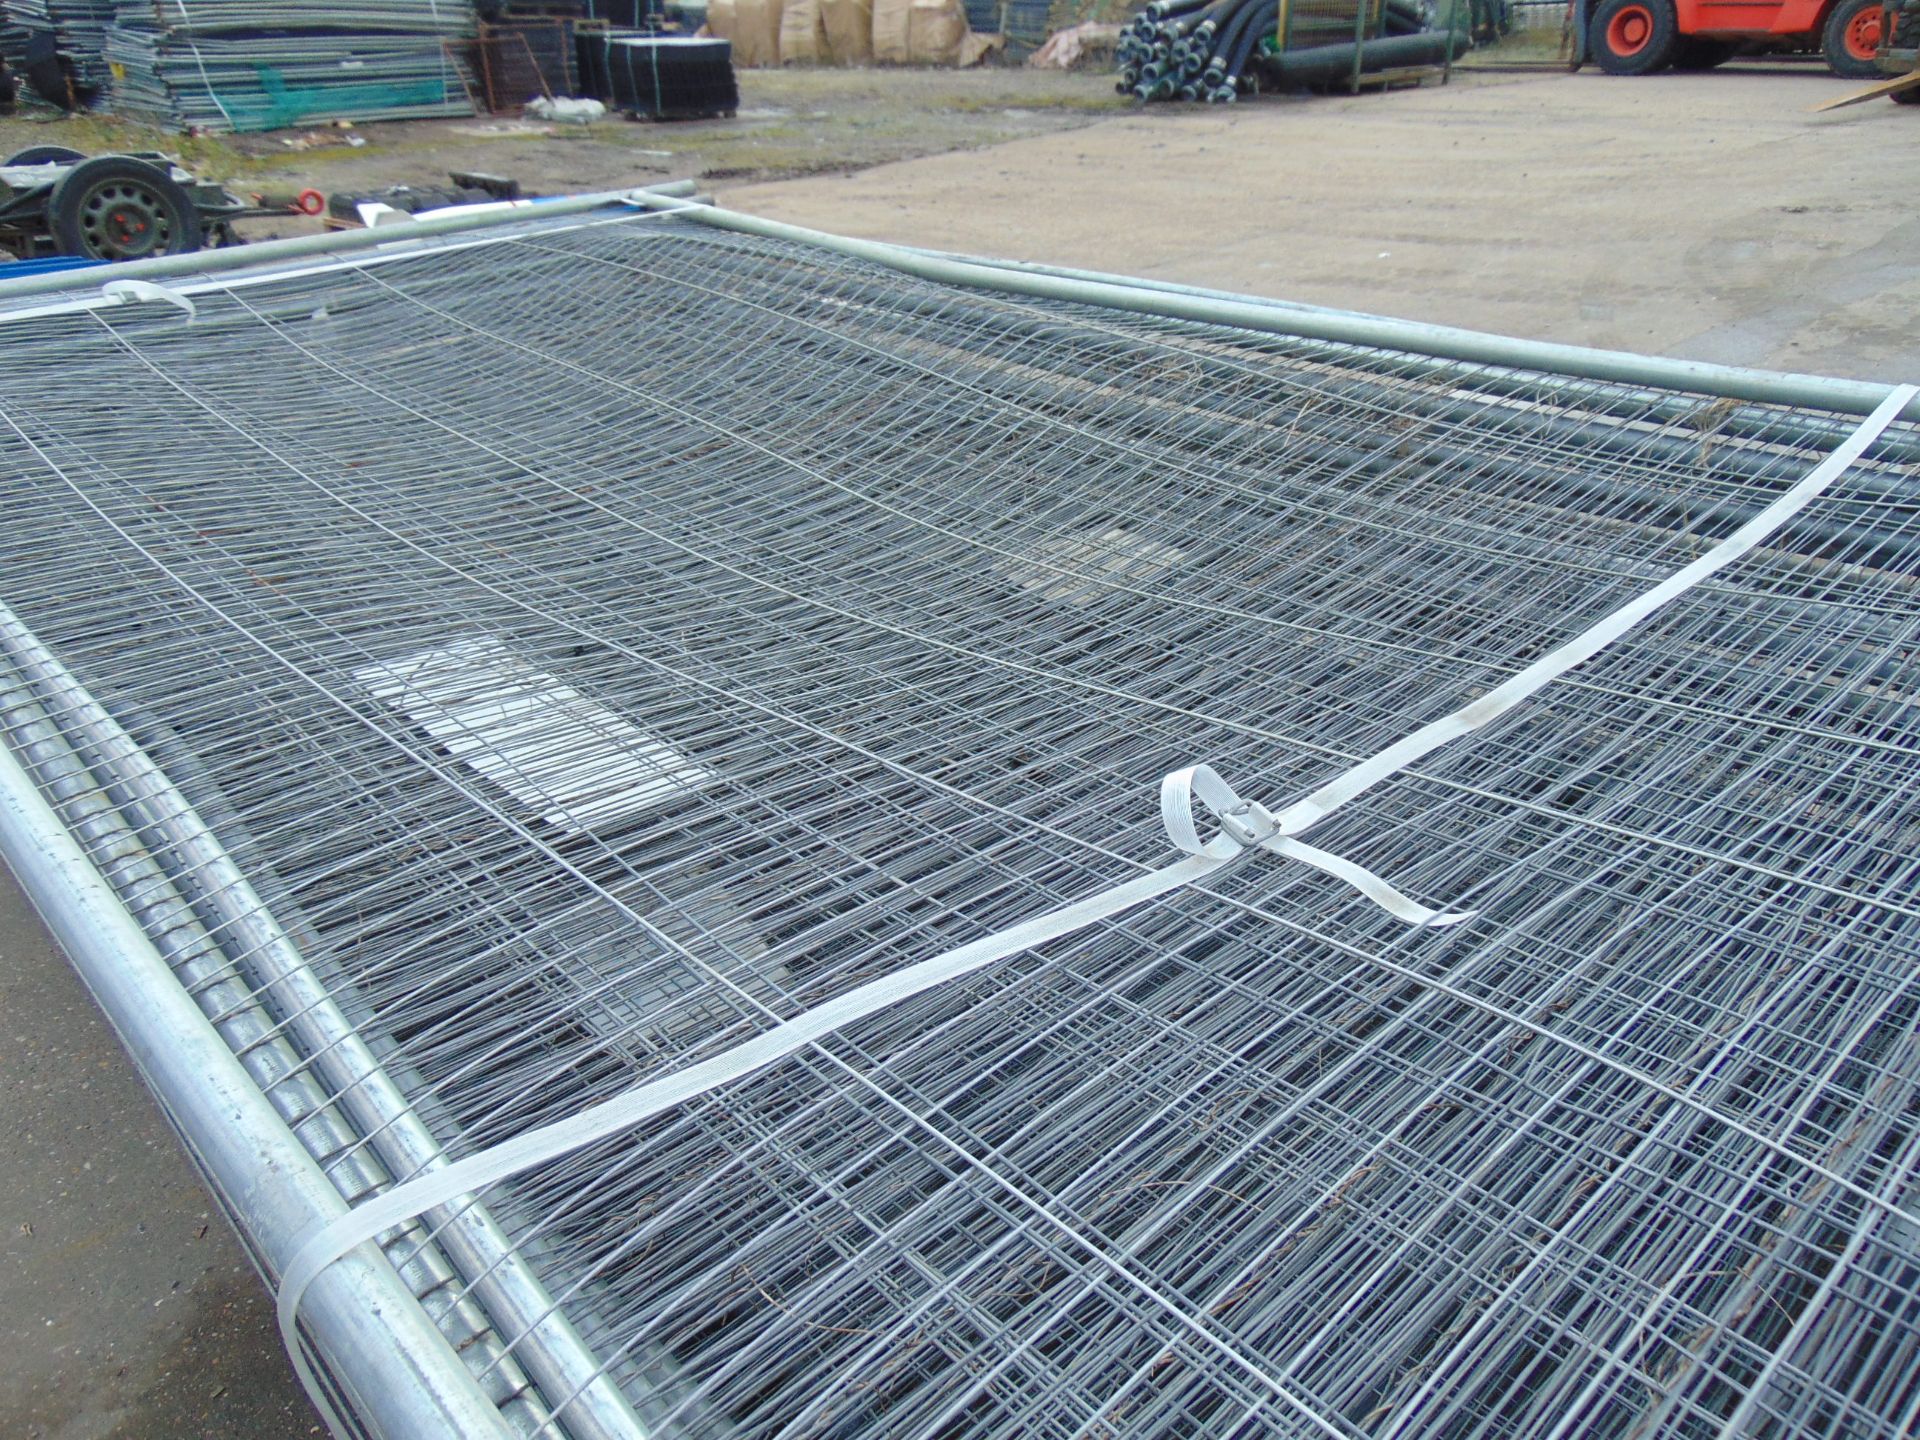 30 x Heras Style Galvanised Fencing Panels 3.5m x 2m - Image 3 of 3